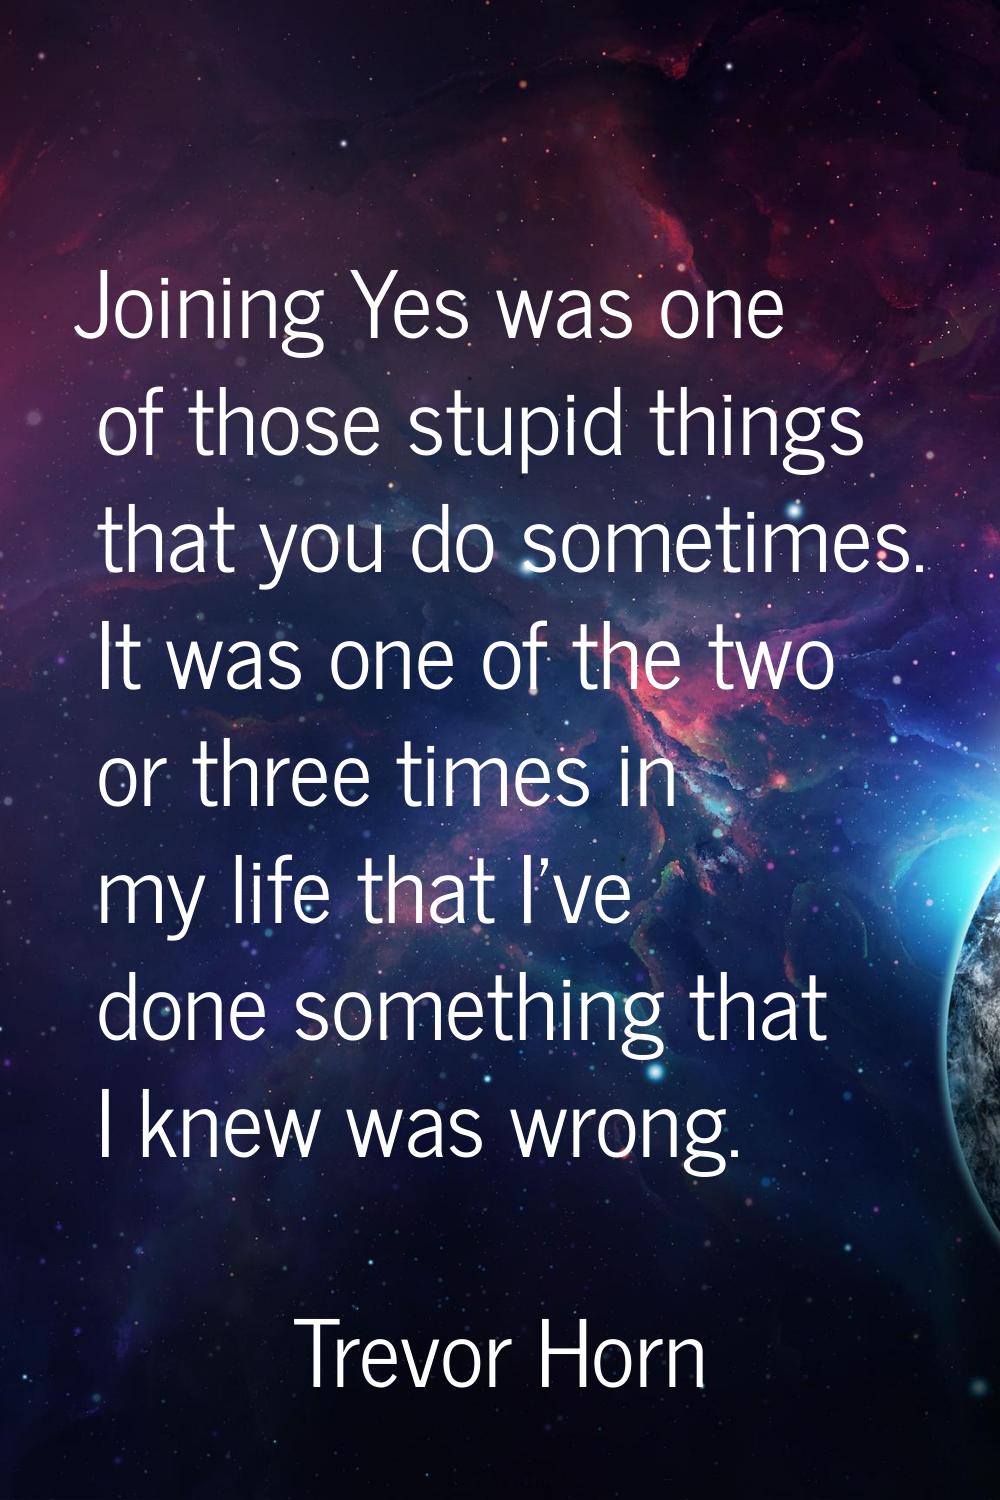 Joining Yes was one of those stupid things that you do sometimes. It was one of the two or three ti